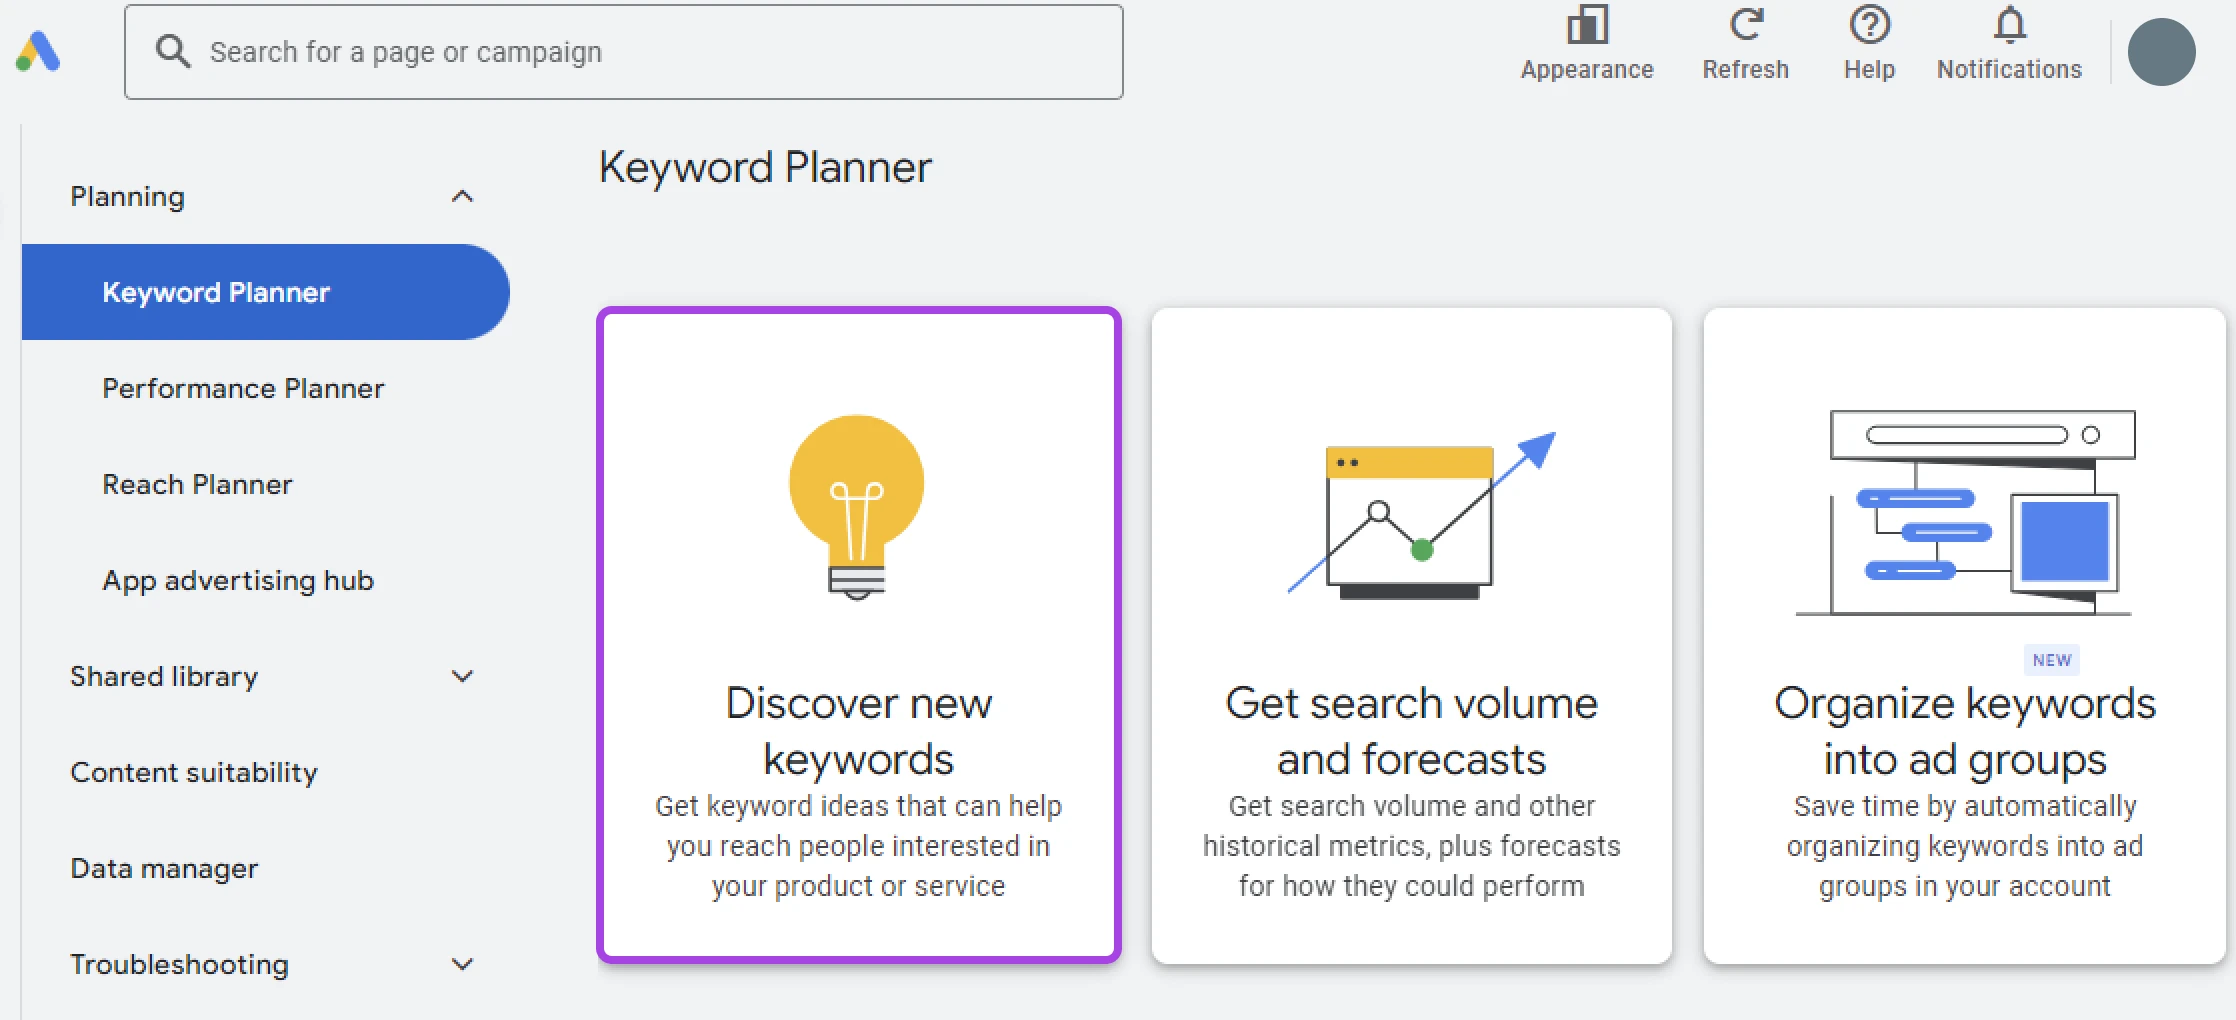 In "Keyword Planner," the left-most tile "Discover new keywords" with a lightbulb illustration is selected.